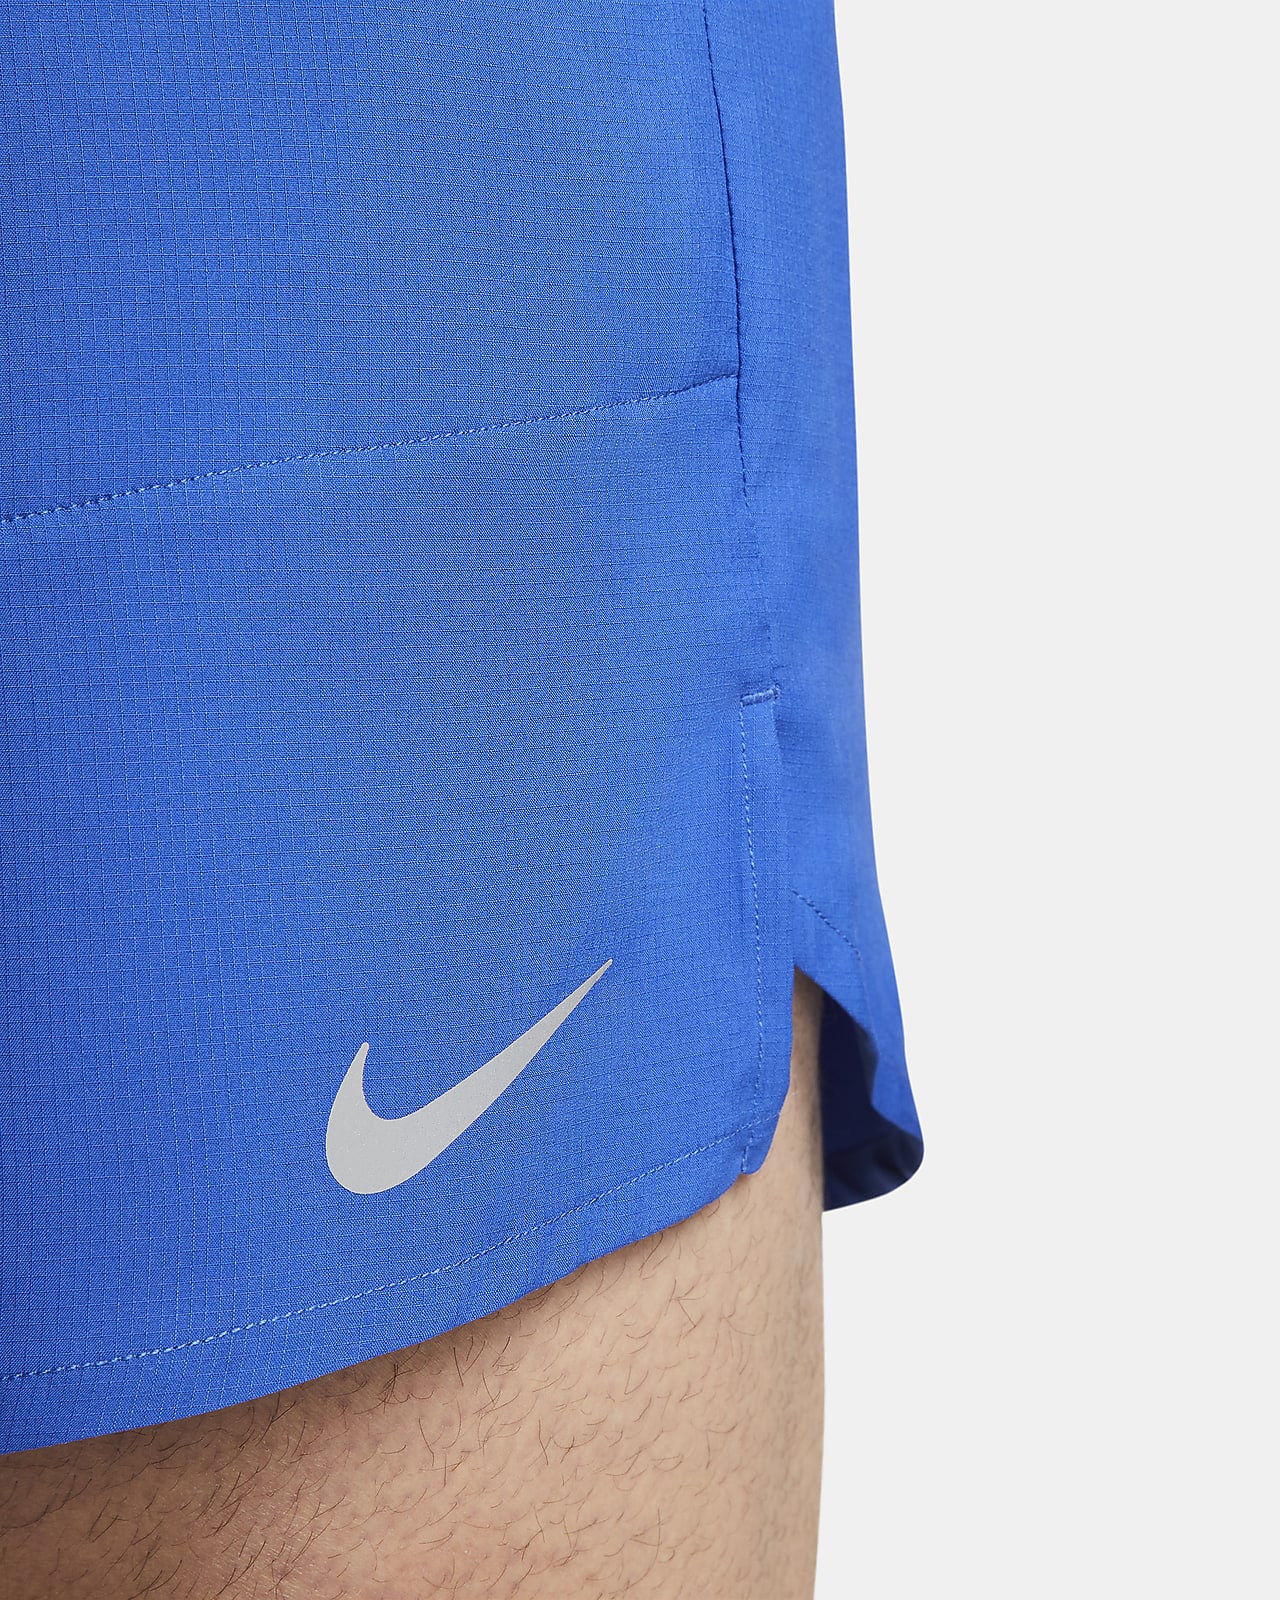 Nike Stride Men's Dri-FIT 7 Brief-Lined Running Shorts.